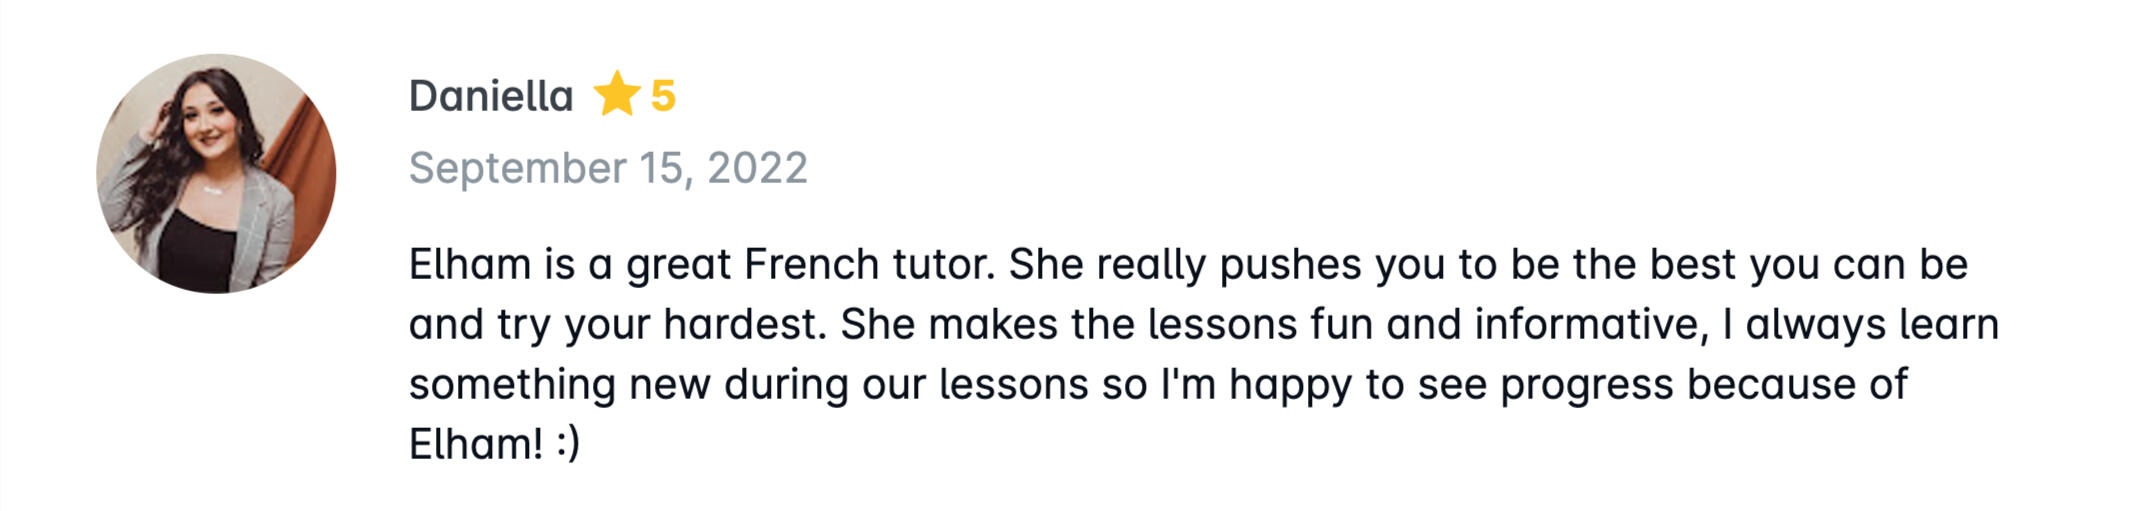 Elham is a great French tutor. She really pushes you to be the best you can be and try your hardest. She makes the lessons fun and informative, I always learn something new during our lessons so I'm happy to see progress because of Elham! :)